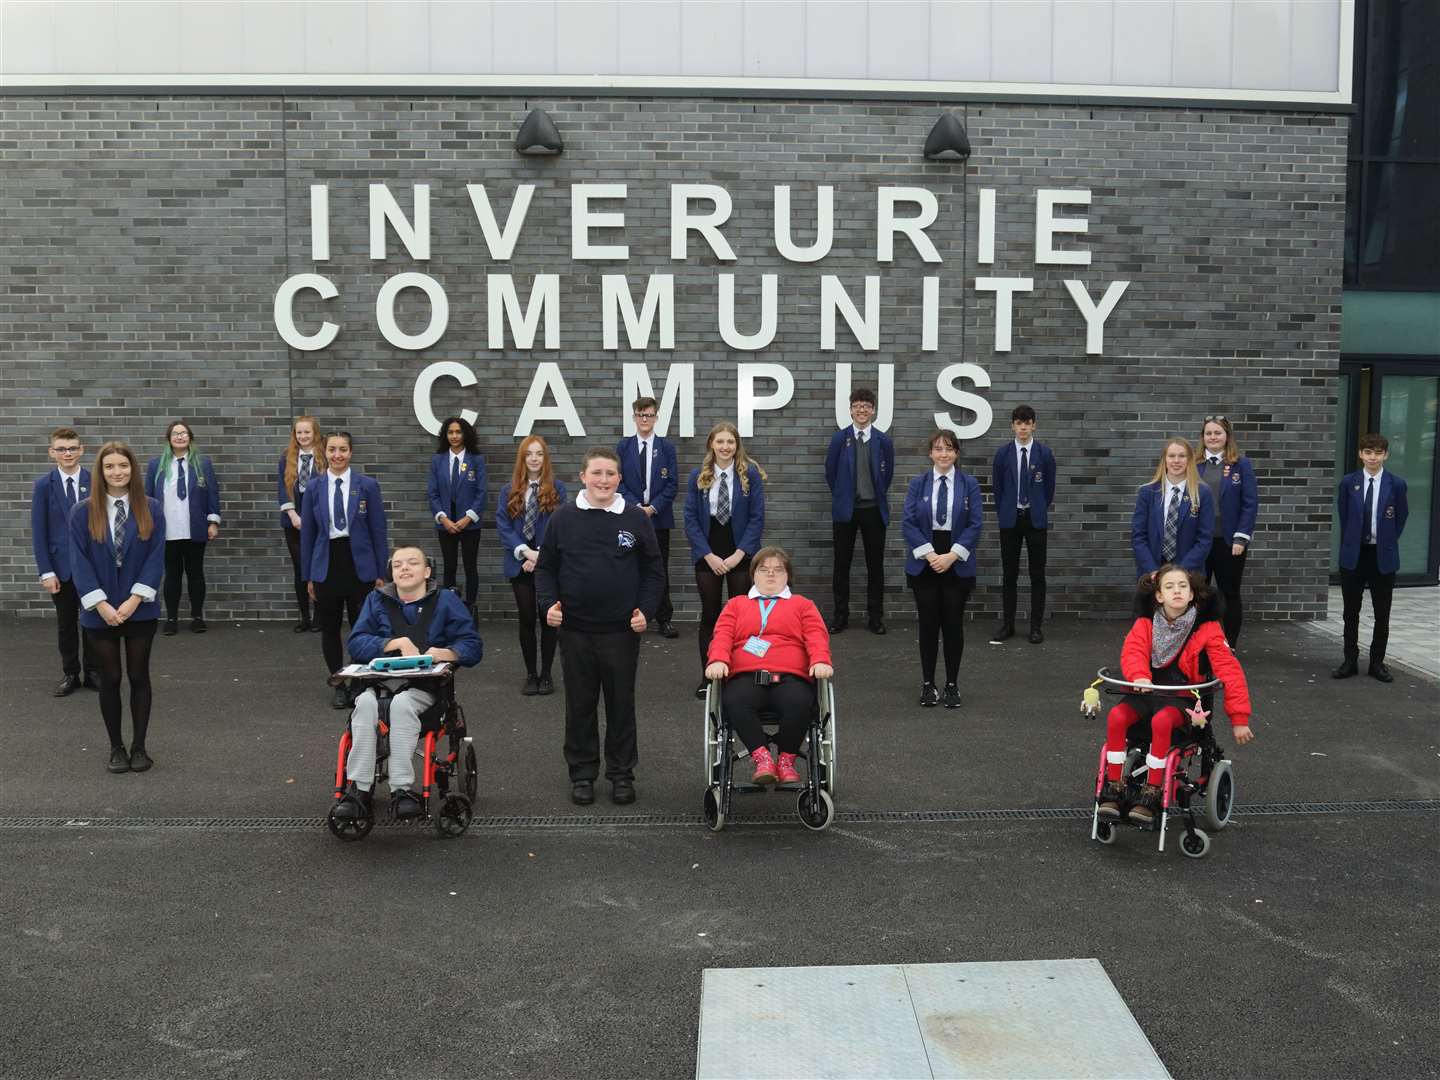 Pupils from Inverurie Academy and St Andrew's were welcomed to the new campus